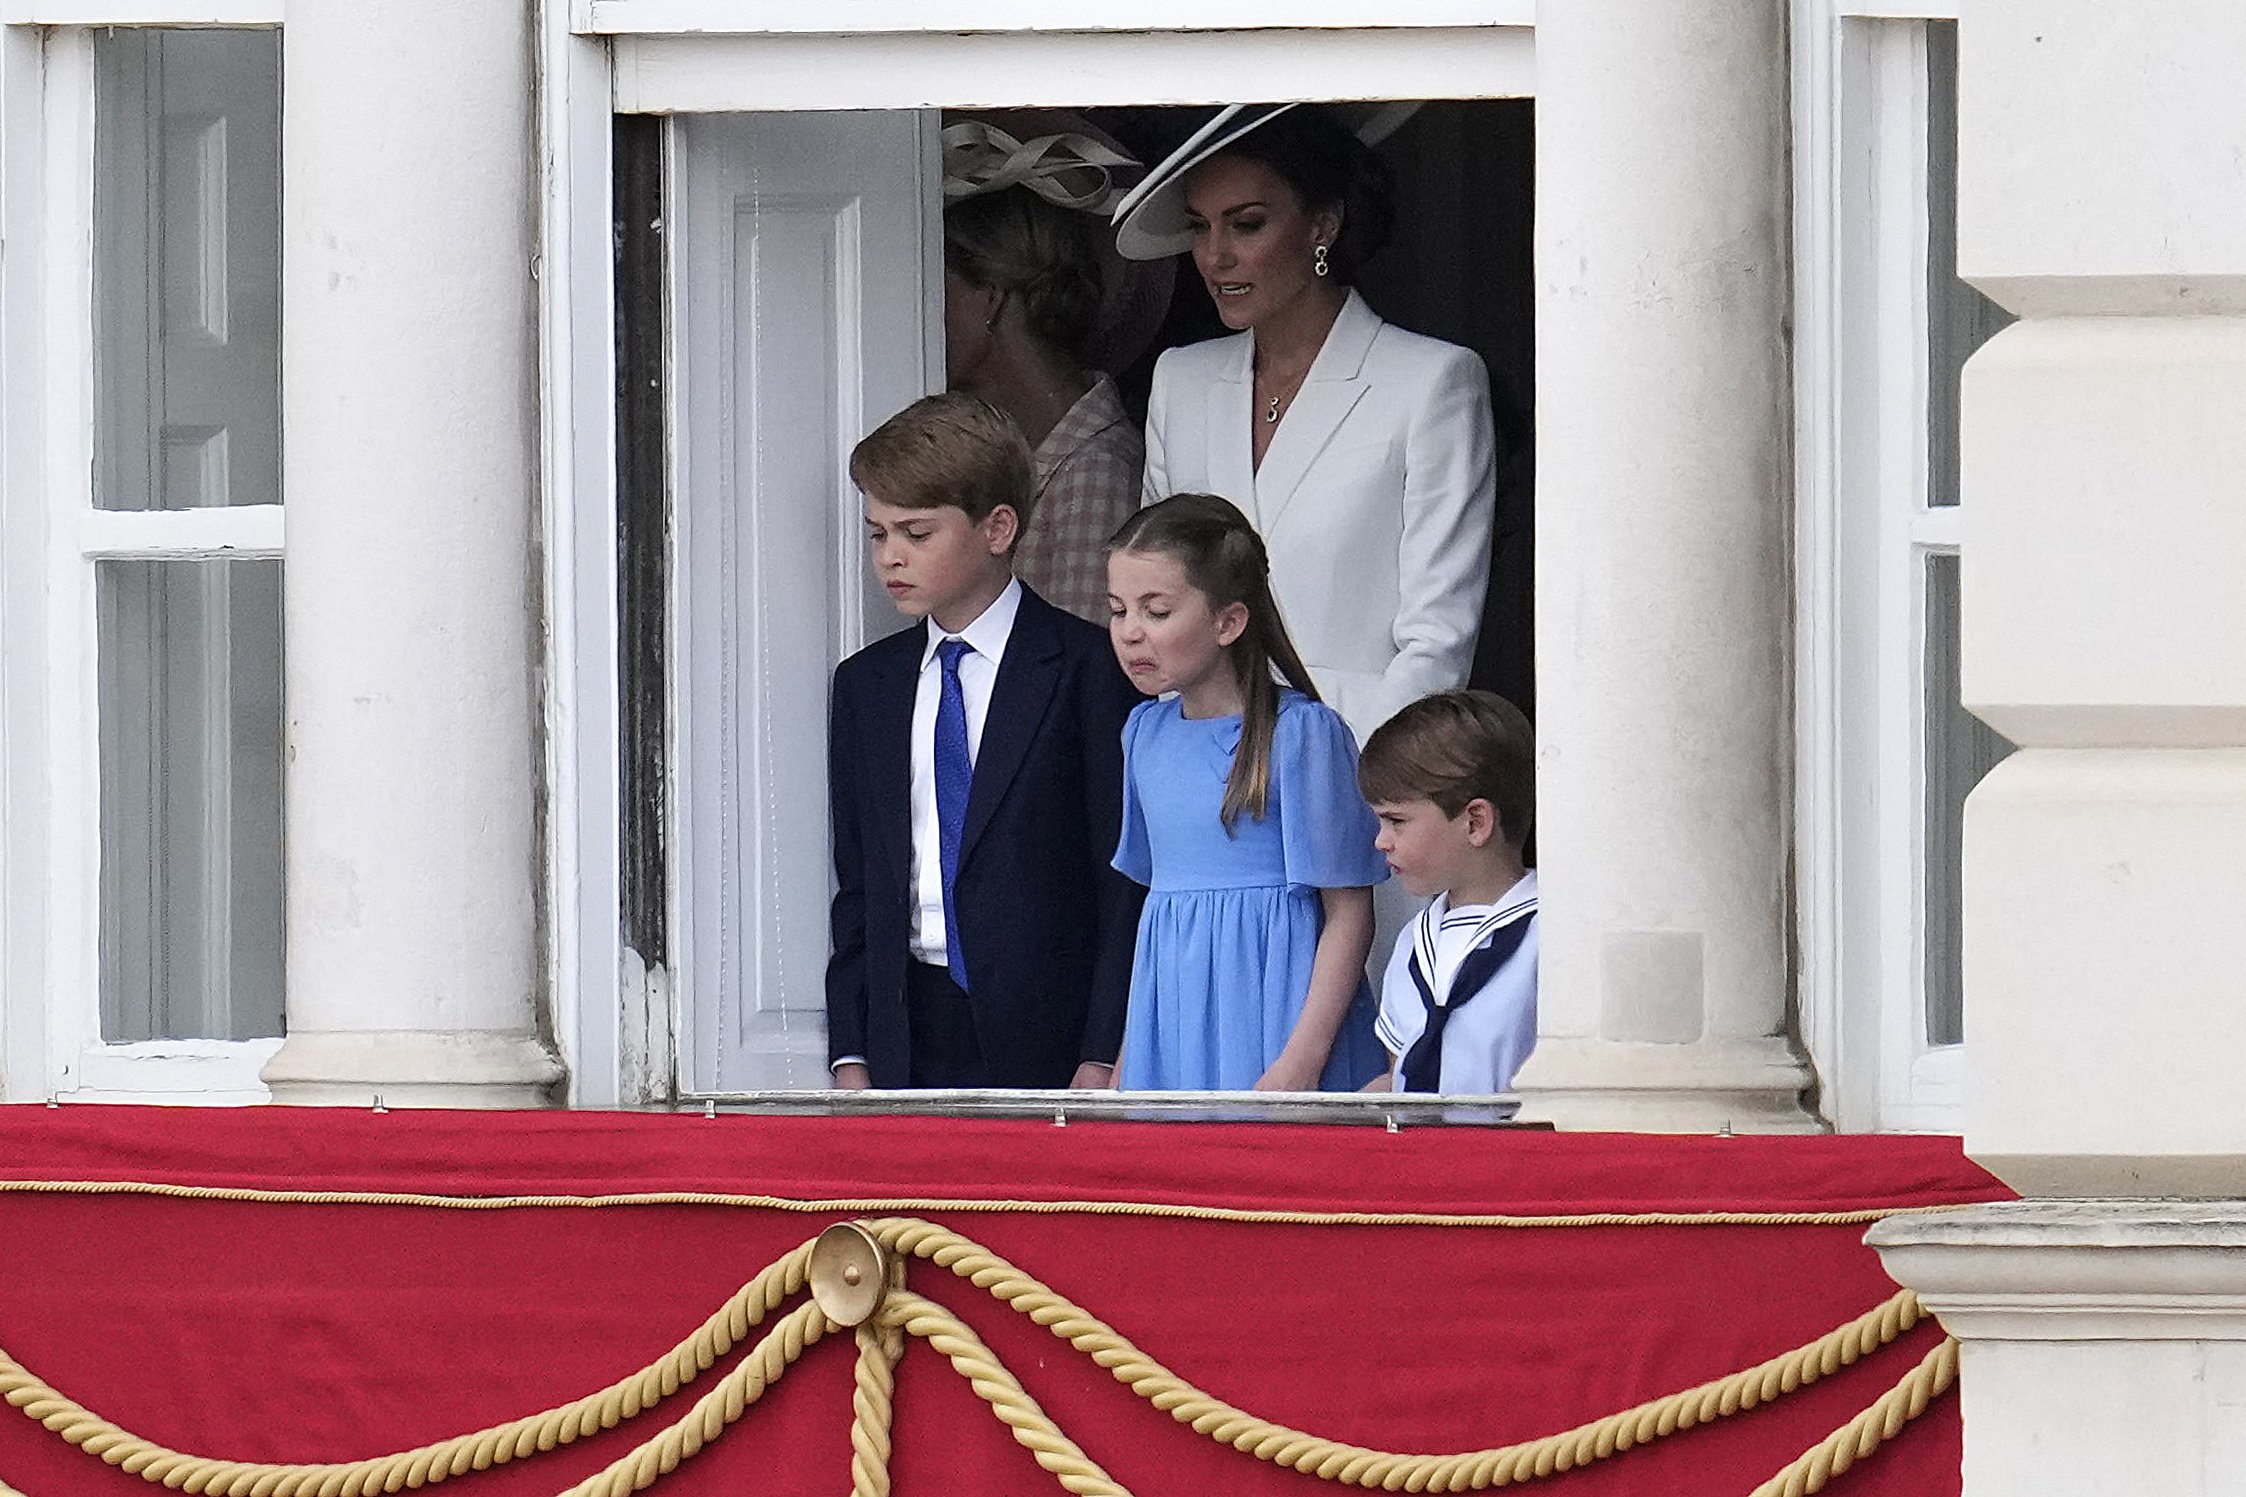 Kate, Duchess of Cambridge, with her children, Prince George of Cambridge, Princess Charlotte of Cambridge and Prince Louis of Cambridge, watch the parade of troops overlooking the Horse Guards during the Queen's Birthday Parade, Trooping the Colour, as part of Queen Elizabeth II's Platinum Jubilee celebrations, London, 2 June 2022 |  Source: Getty Images